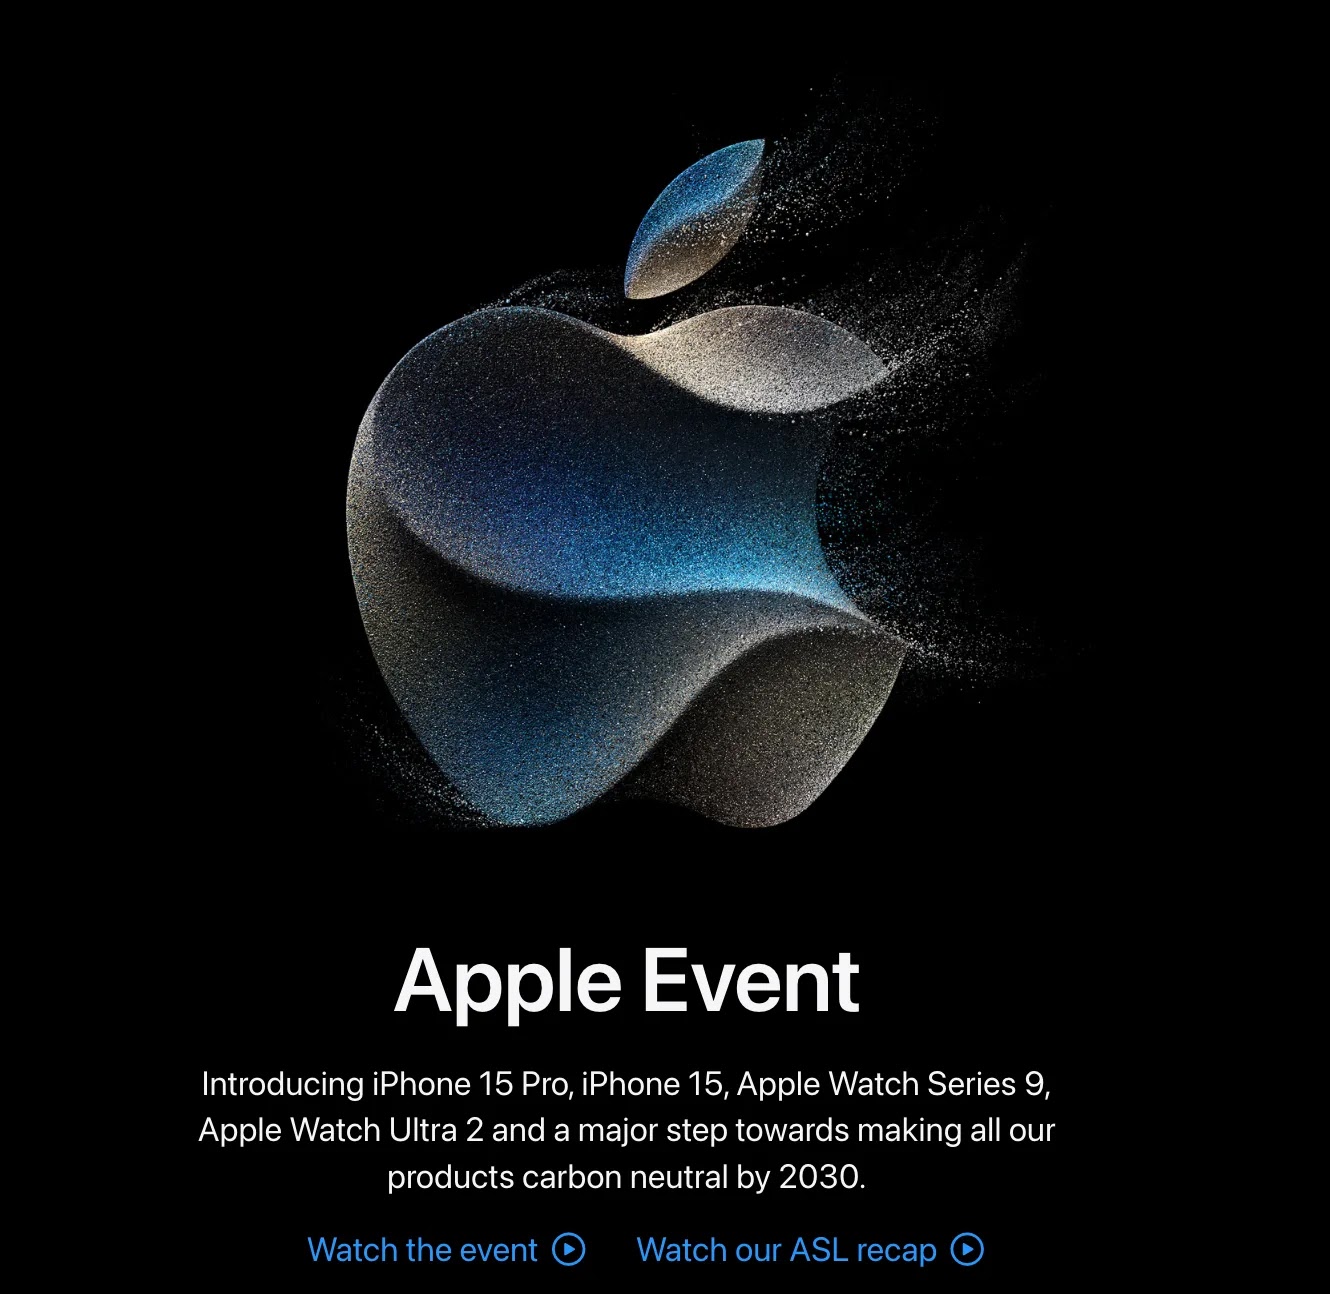 Apple Event poster